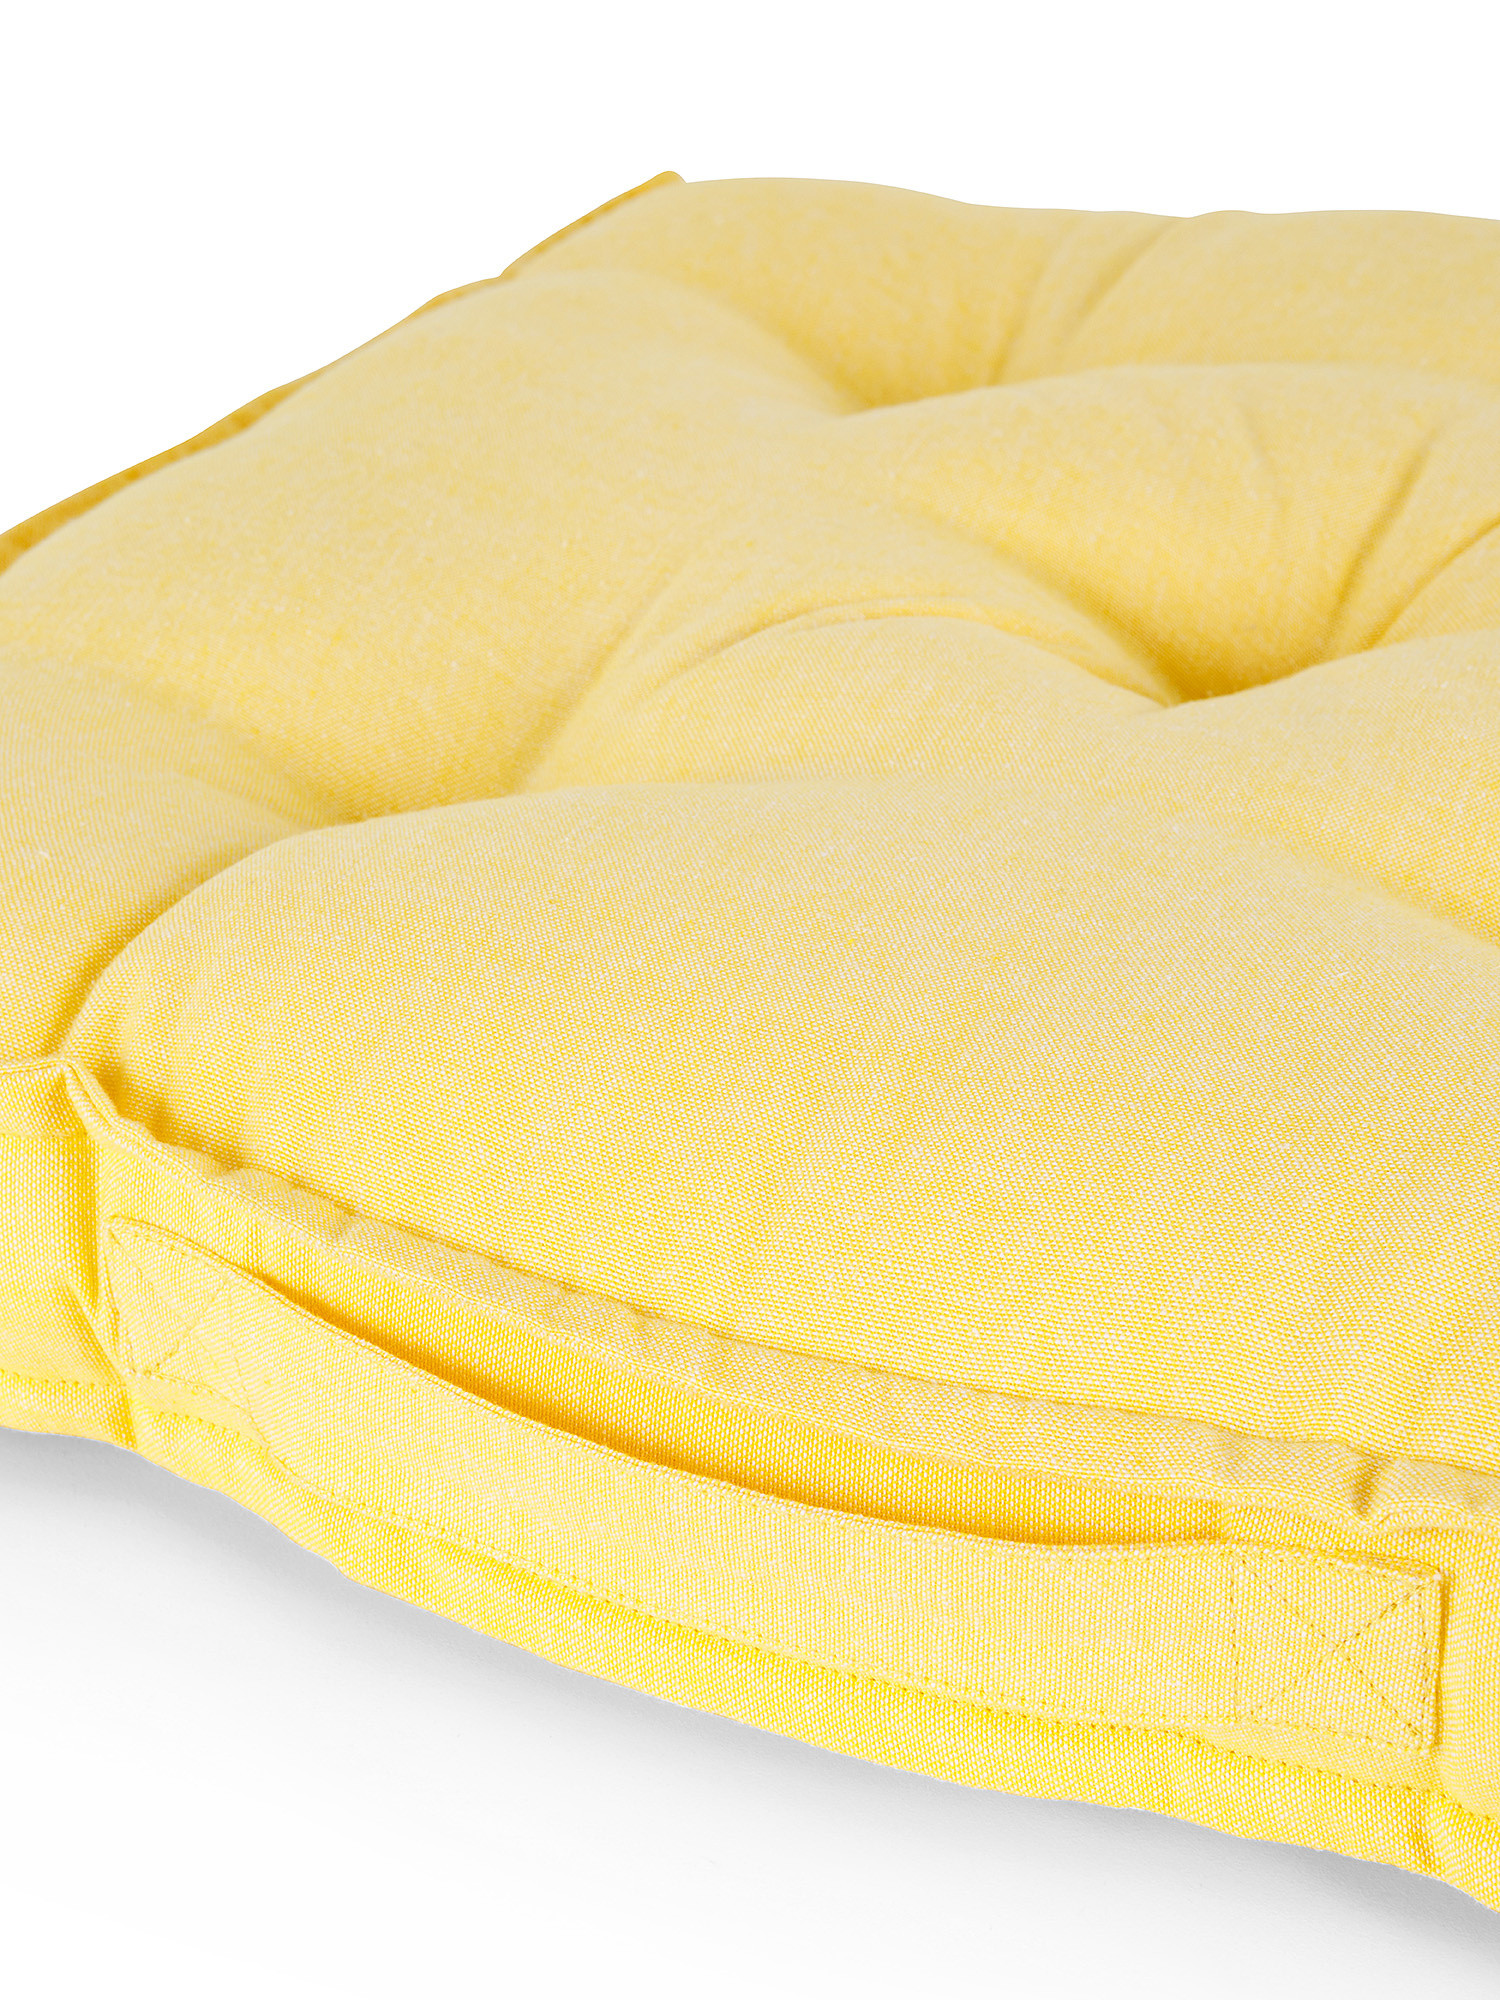 Solid color mattress cushion 50x50cm, Yellow, large image number 1